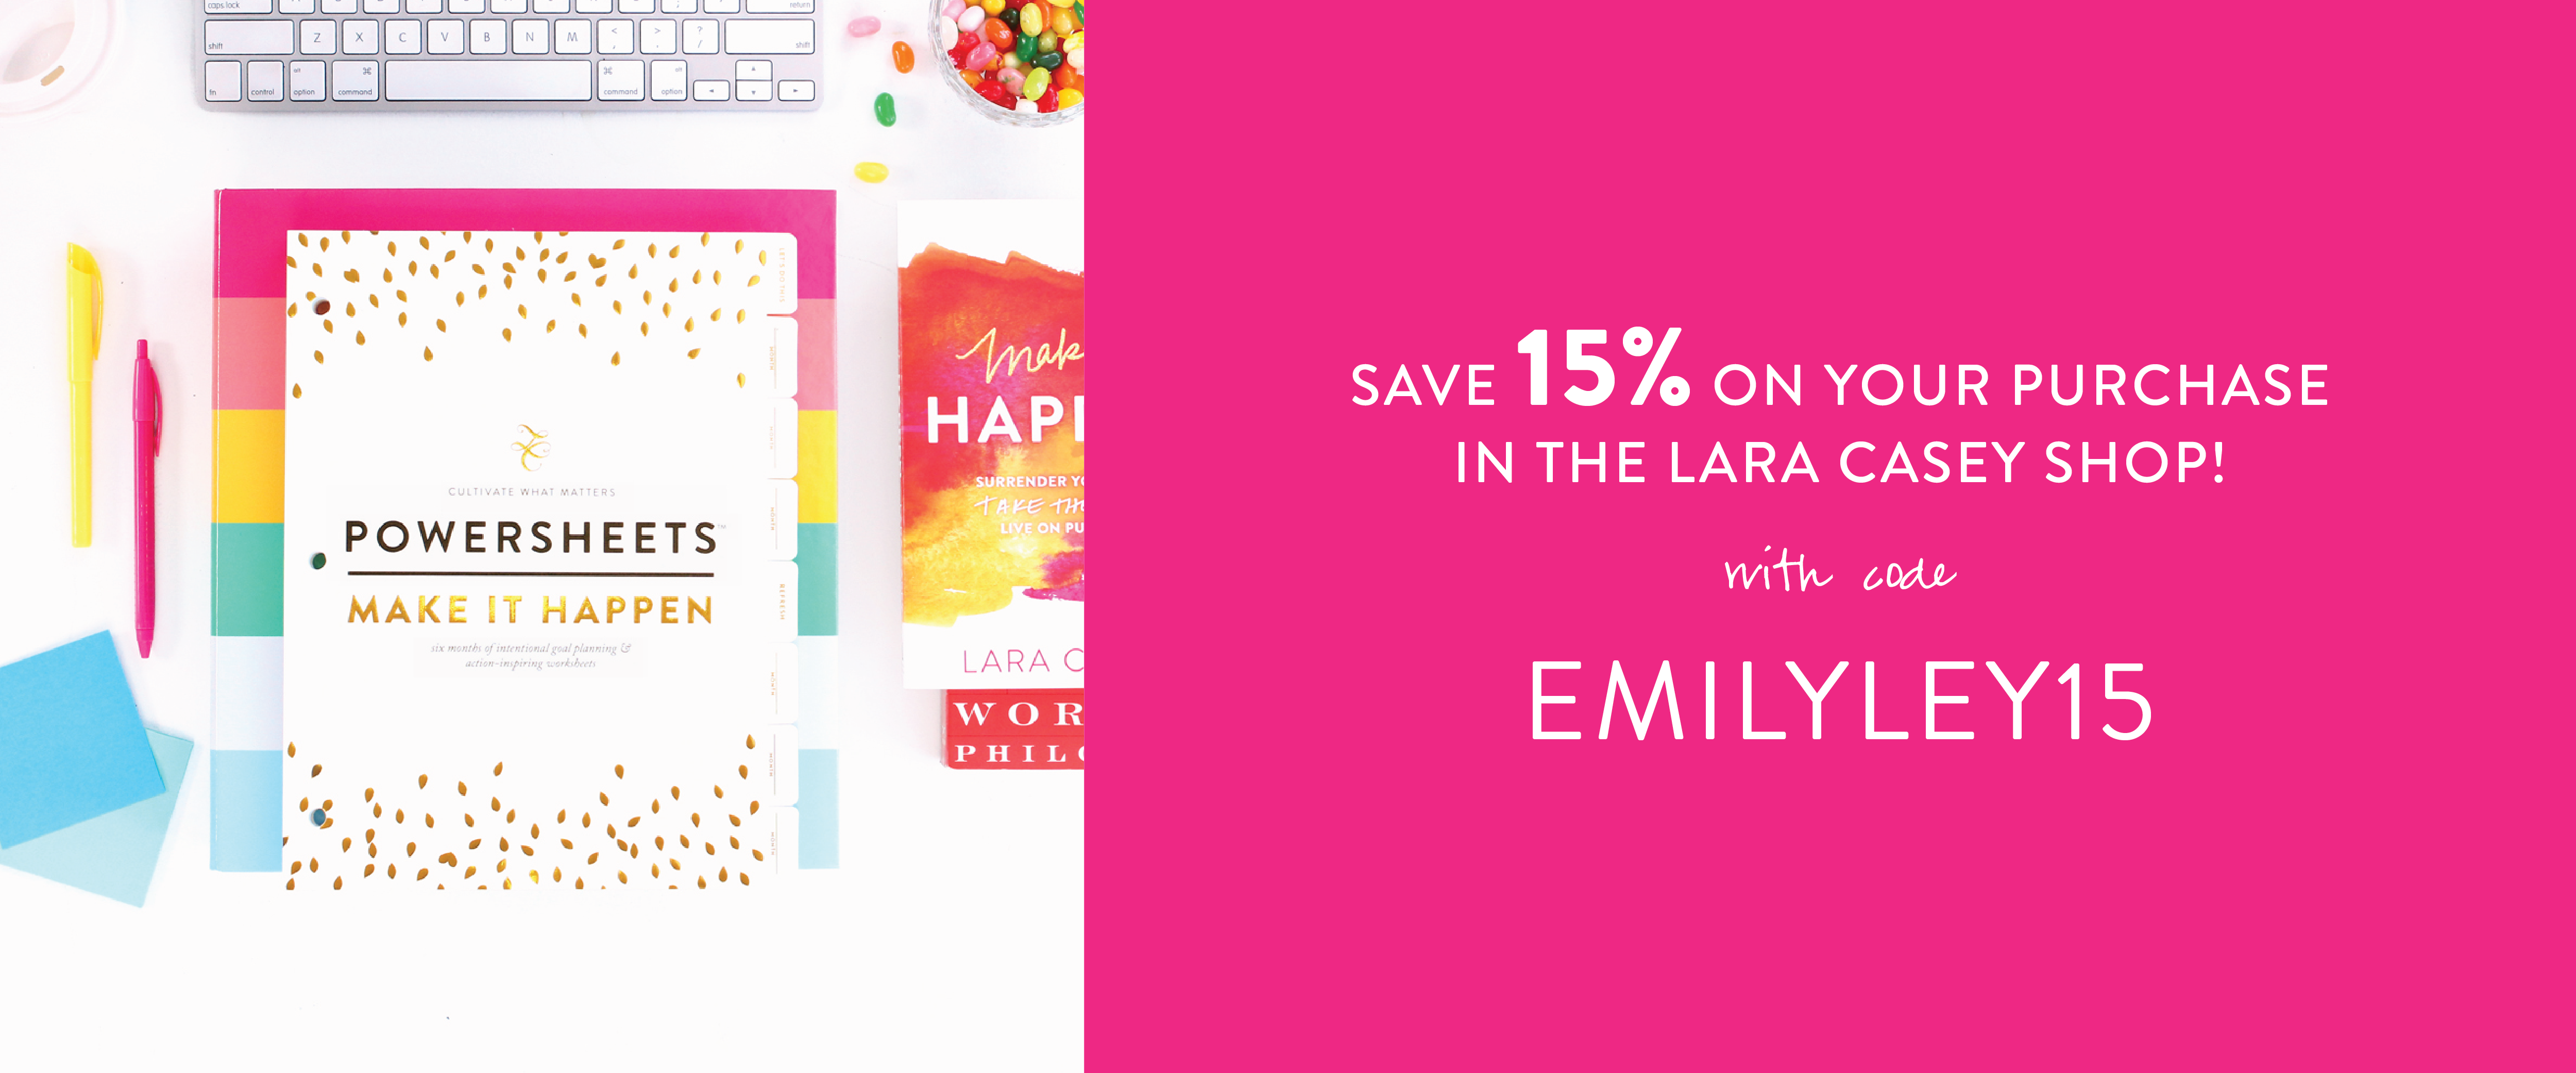 Emily_ley_lara_casey_discount_code-01.png